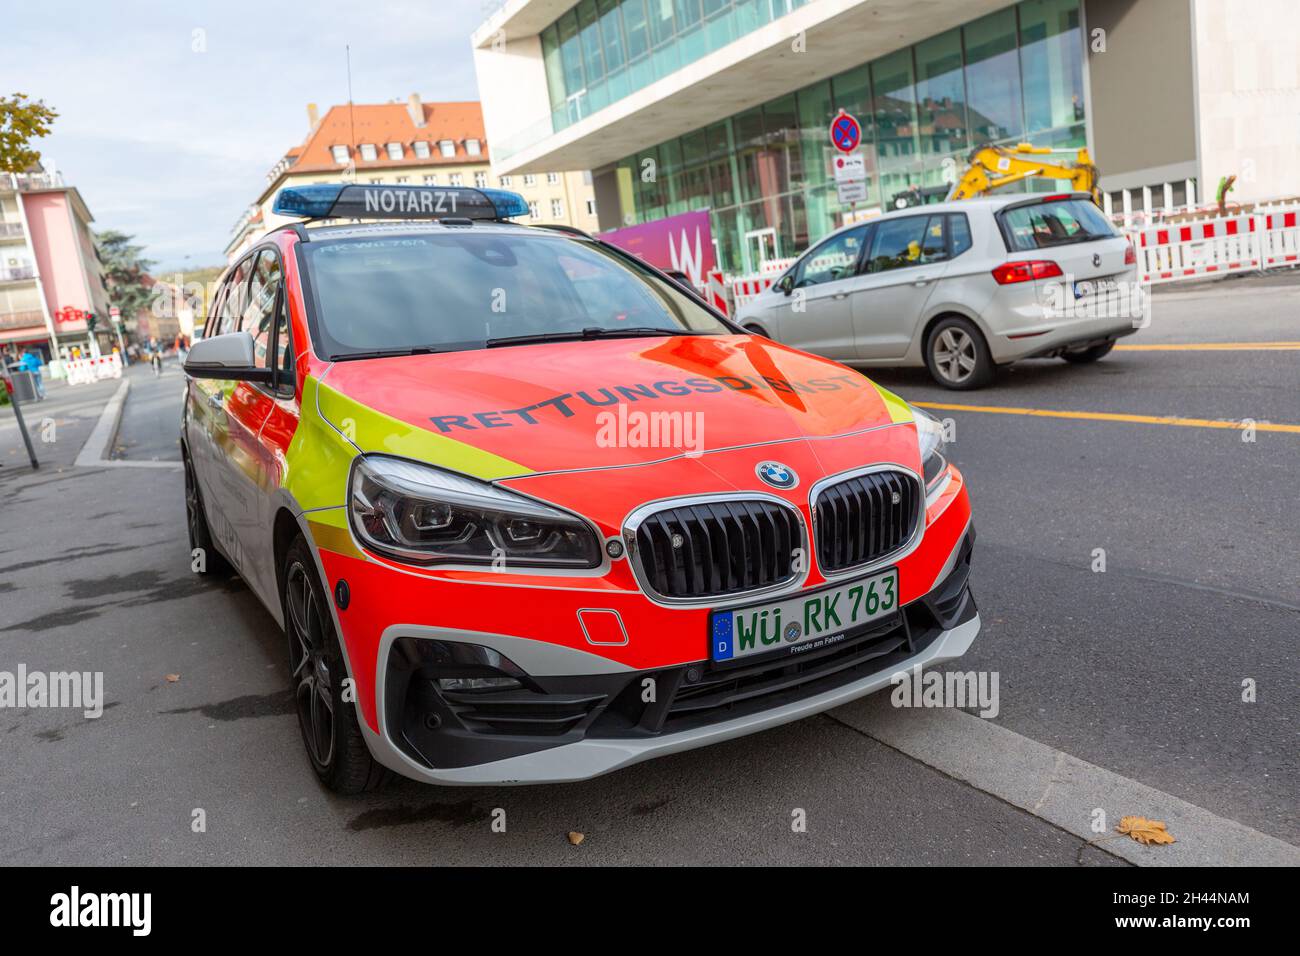 WUERZBURG, GERMANY - OCTOBER 31, 2021: A german Ambulance car from bavarian red cross stands near a street. Stock Photo